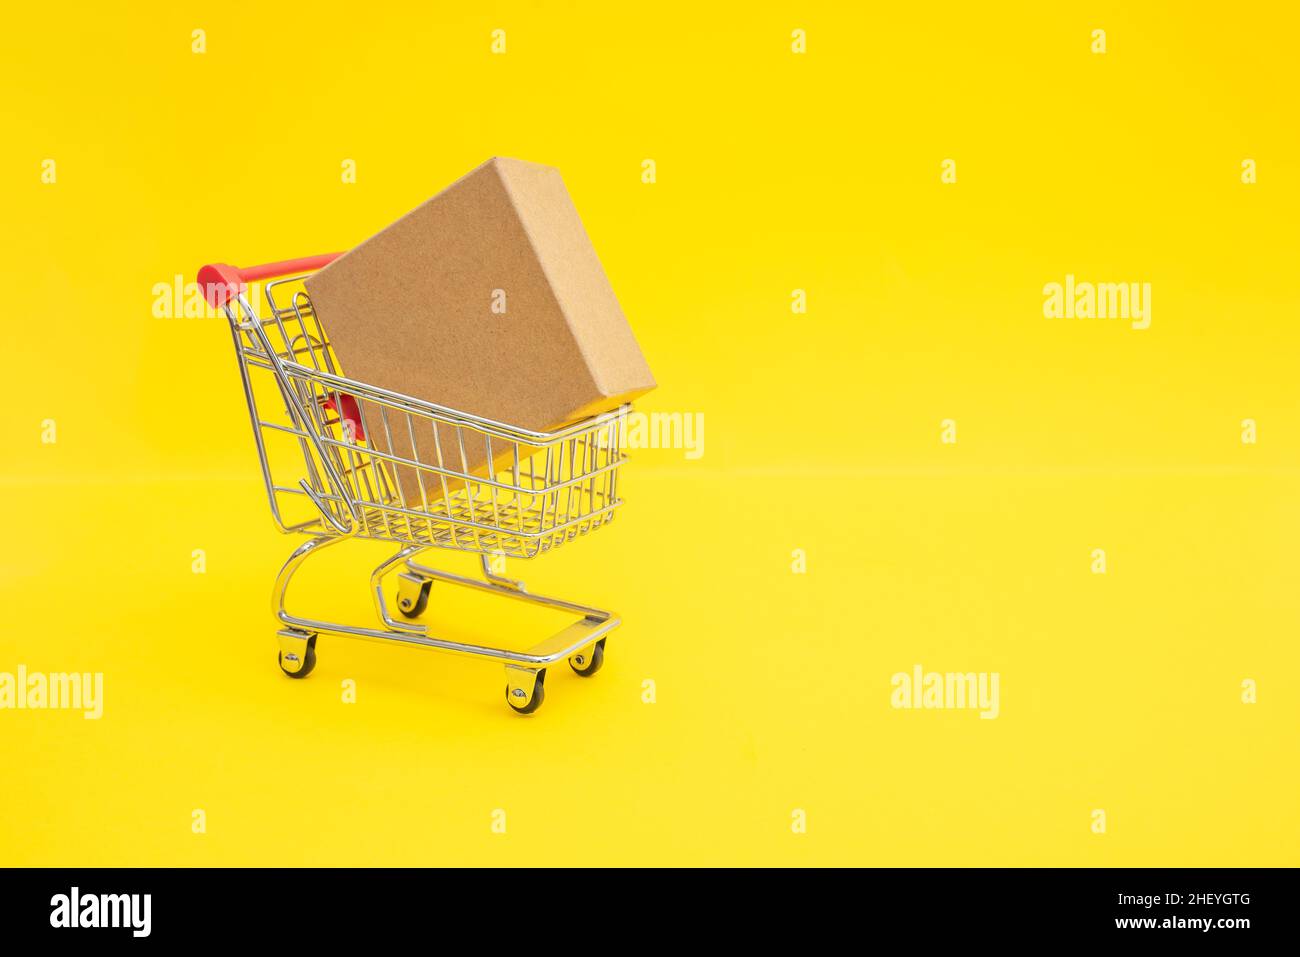 Shopping trolley with cardboard box. Copy space for promo text Stock Photo